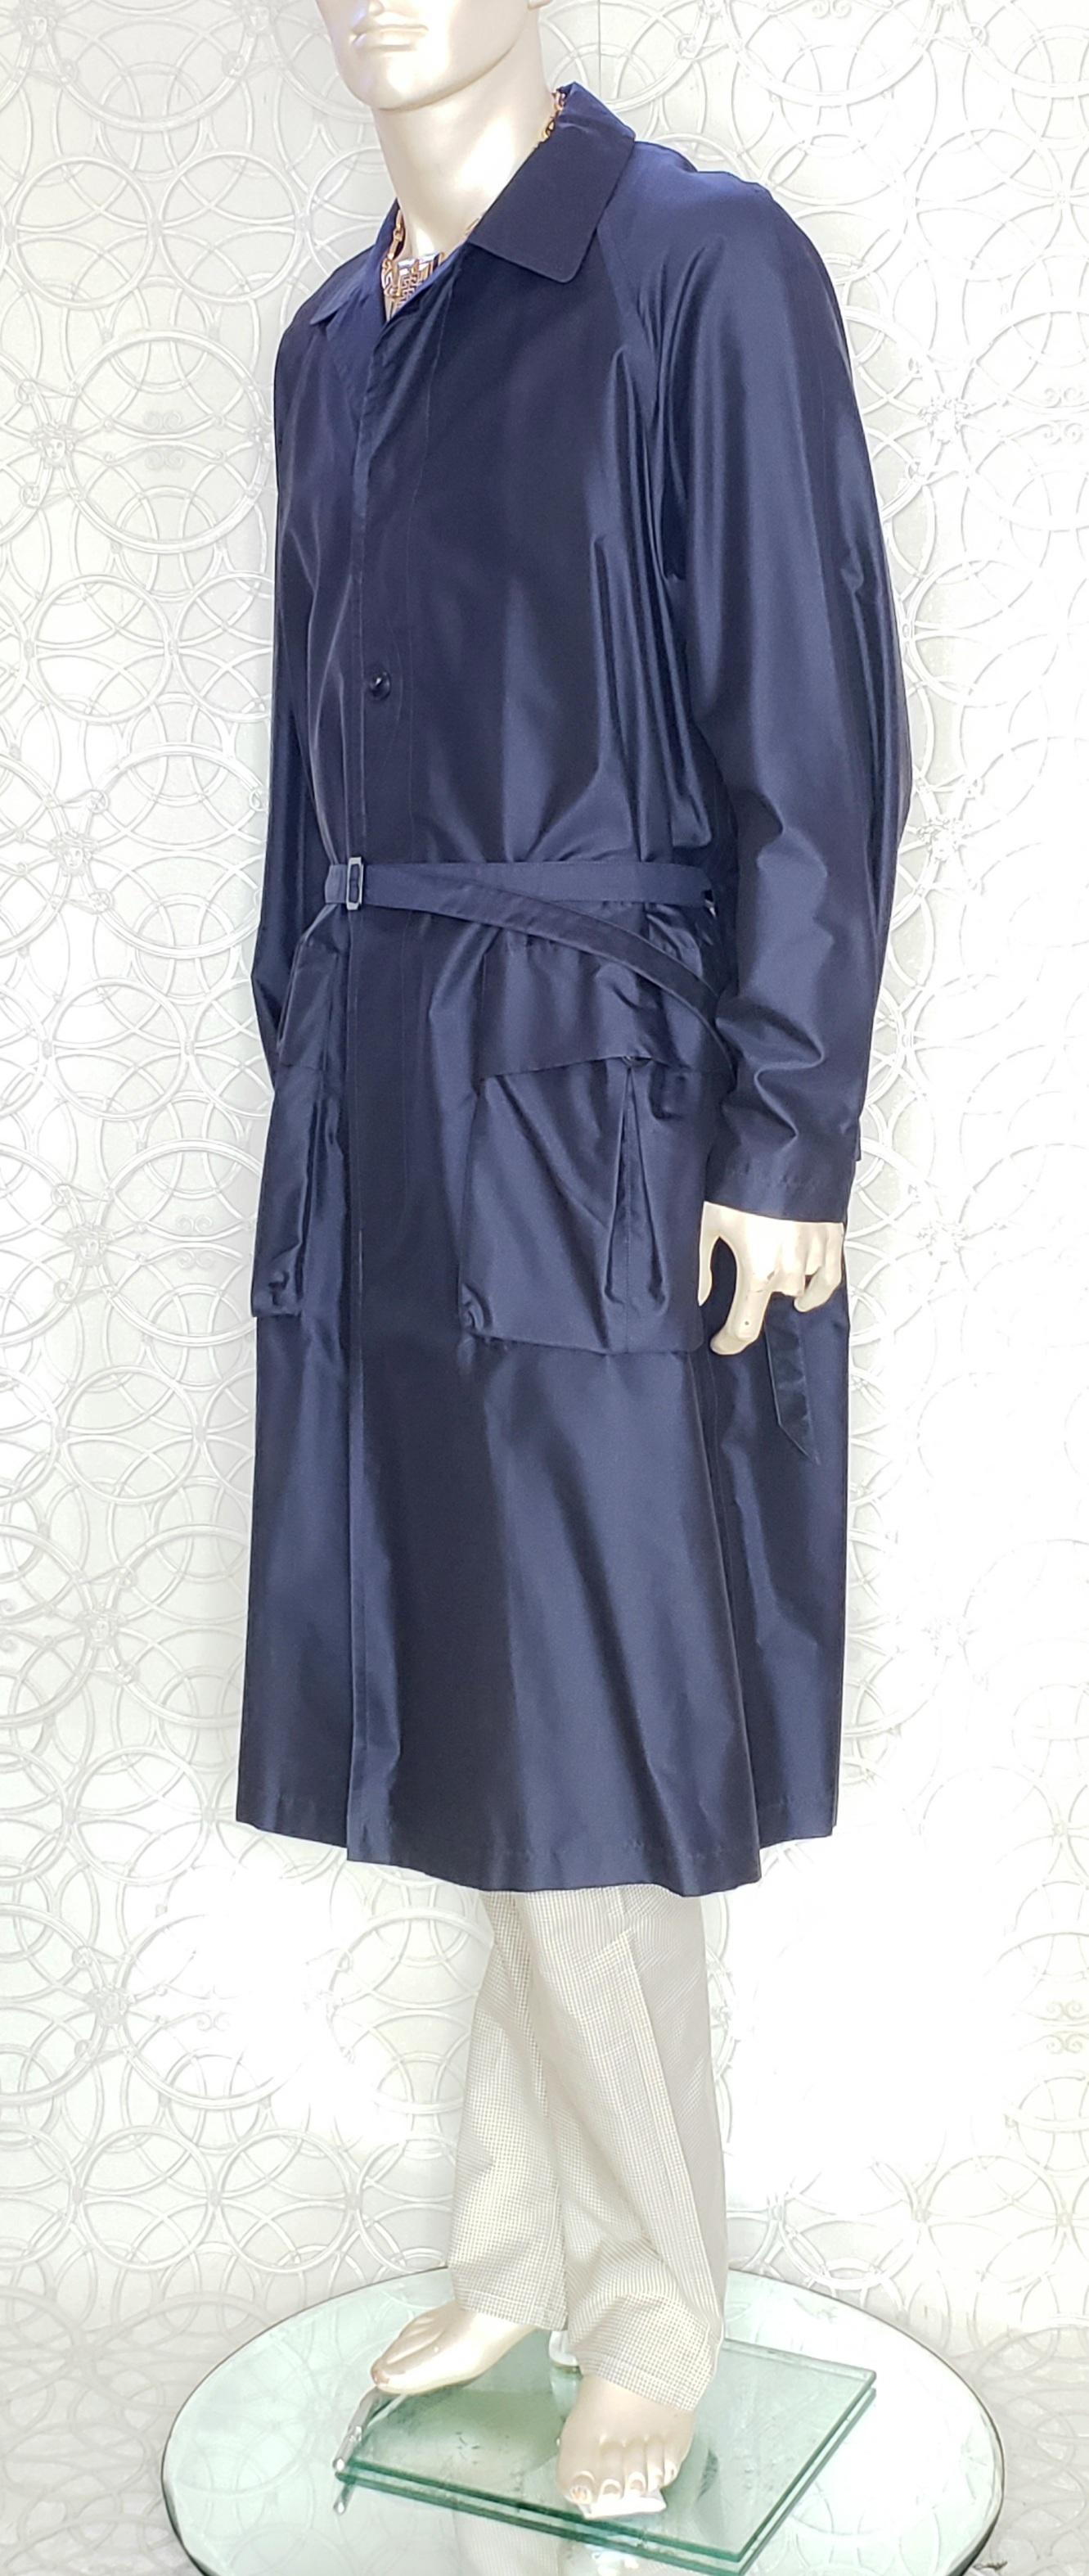 S/S 2016 Look # 34 VERSACE BELTED NAVY BLUE TRENCH SILK COAT 50 - 40 In New Condition For Sale In Montgomery, TX